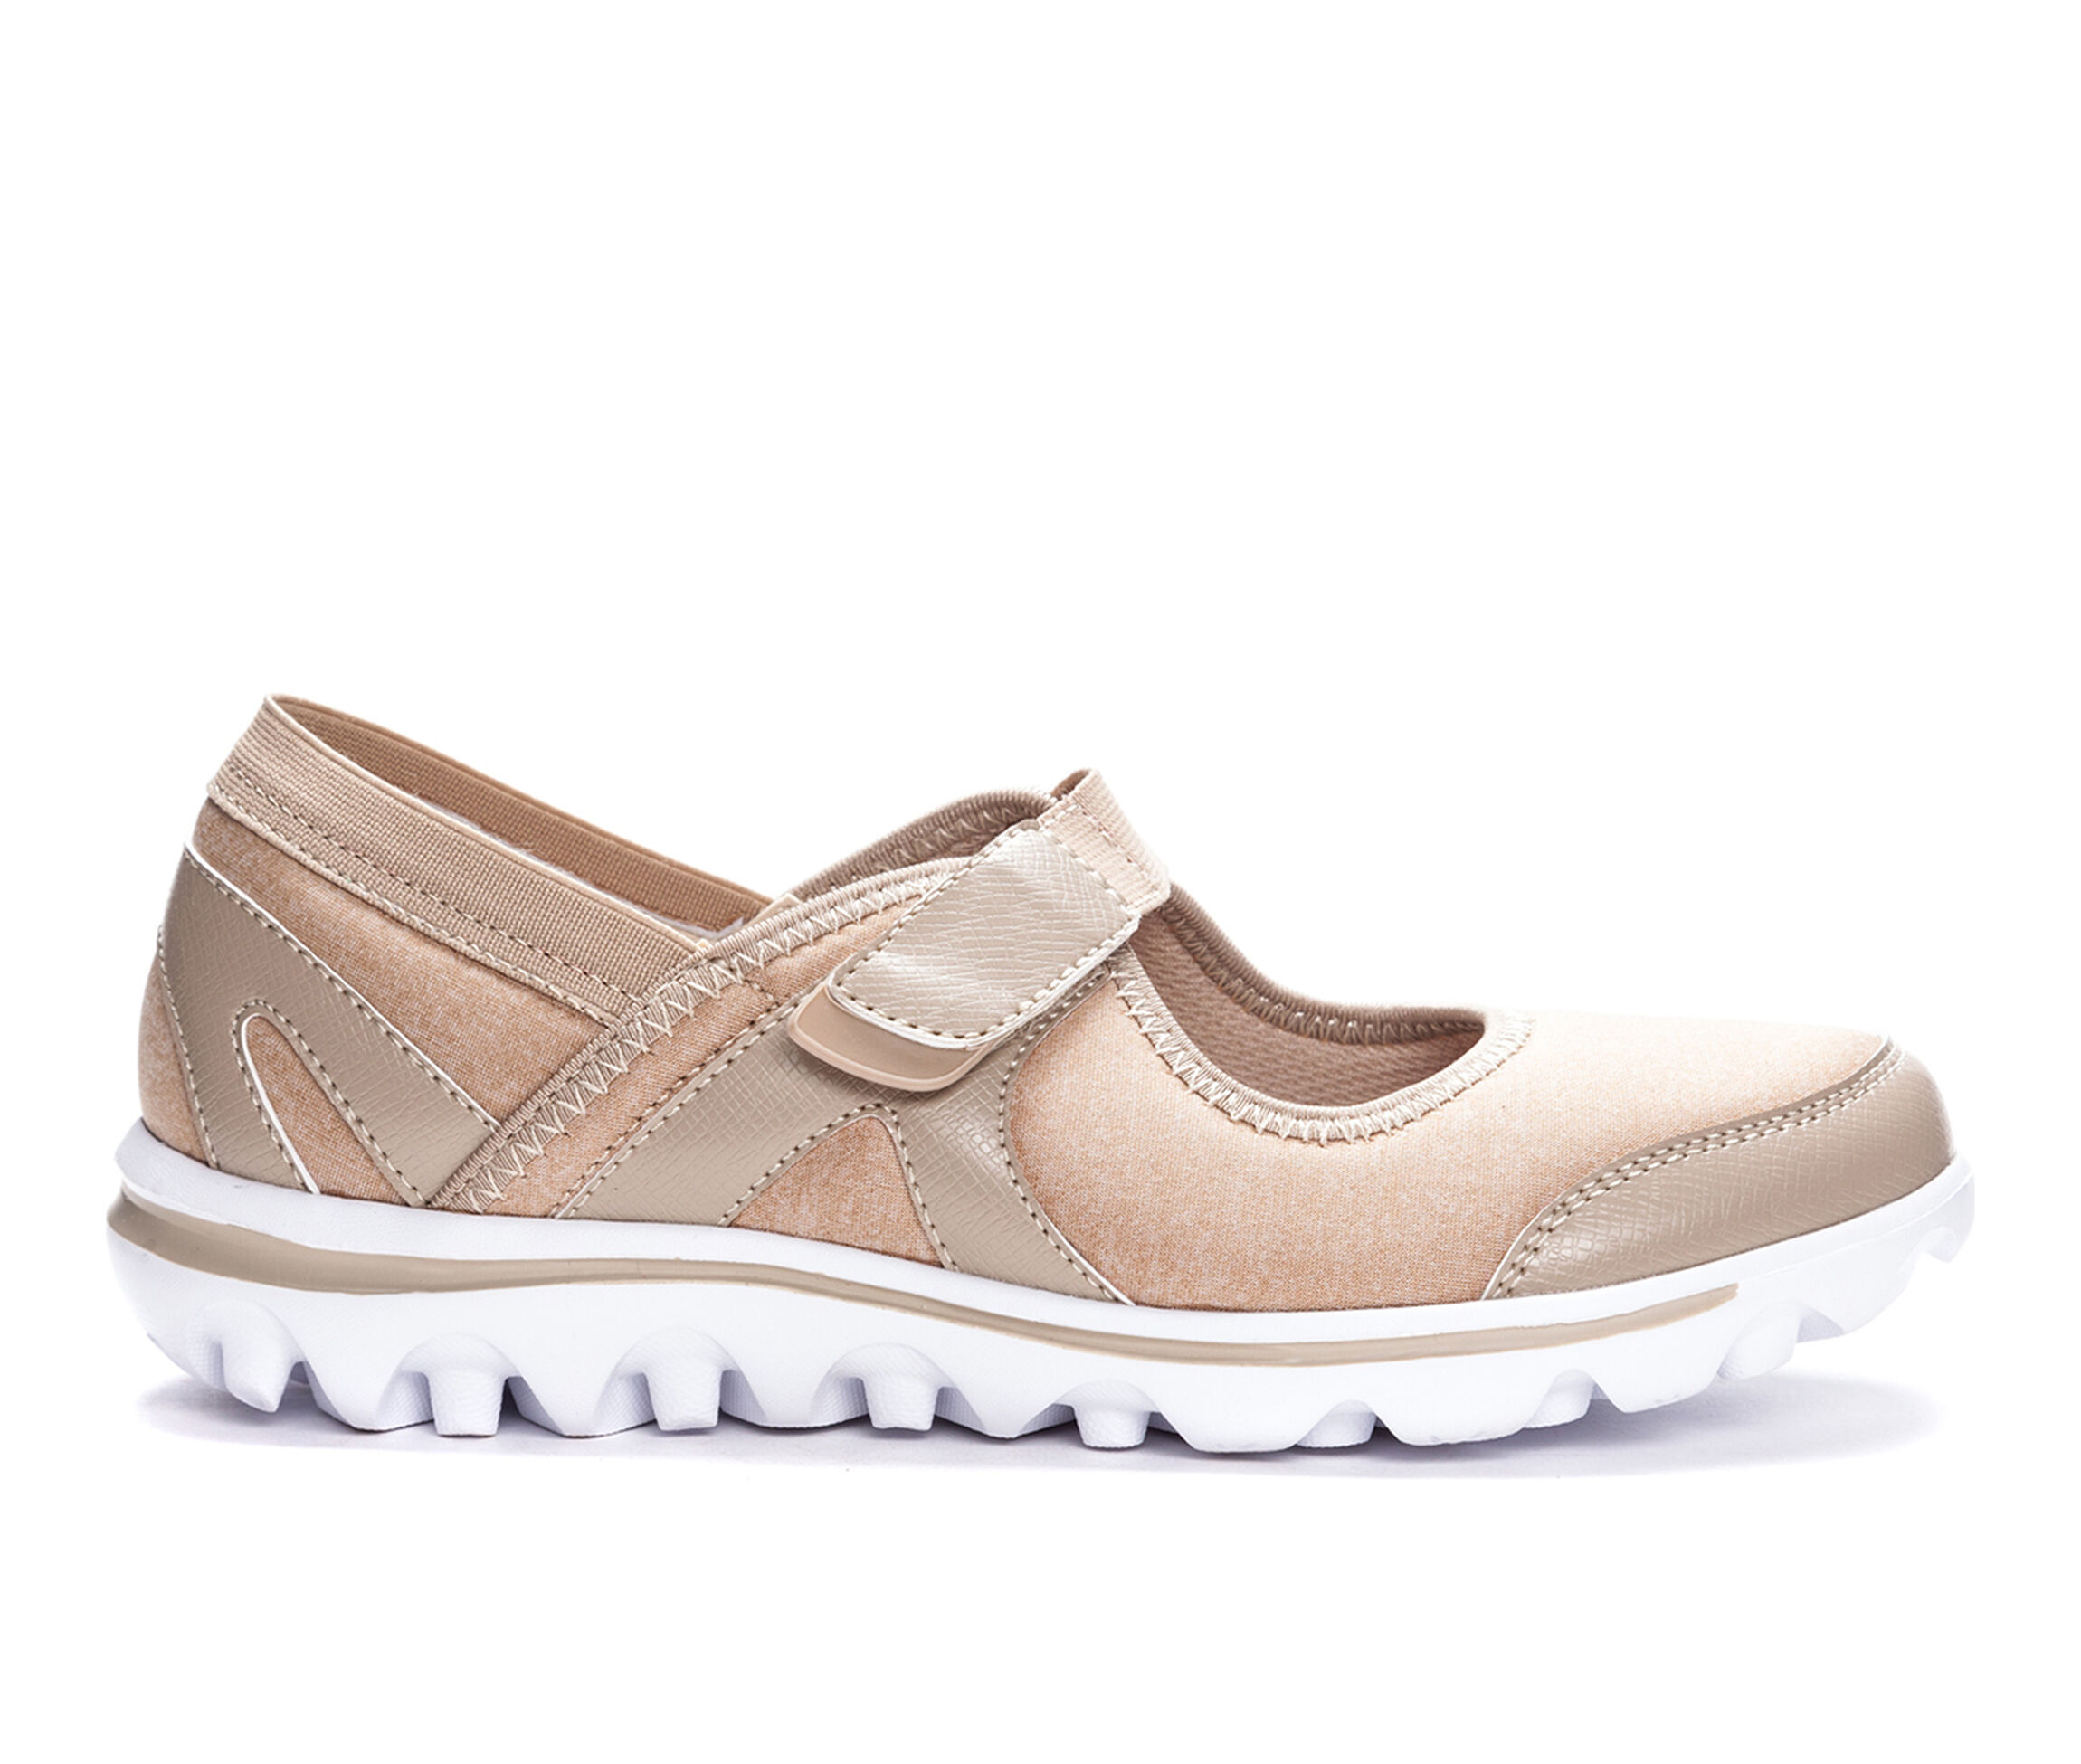 Must Have Women's Propet Onalee Sneakers in Beige Size 6.5 Narrow from  Propet | AccuWeather Shop